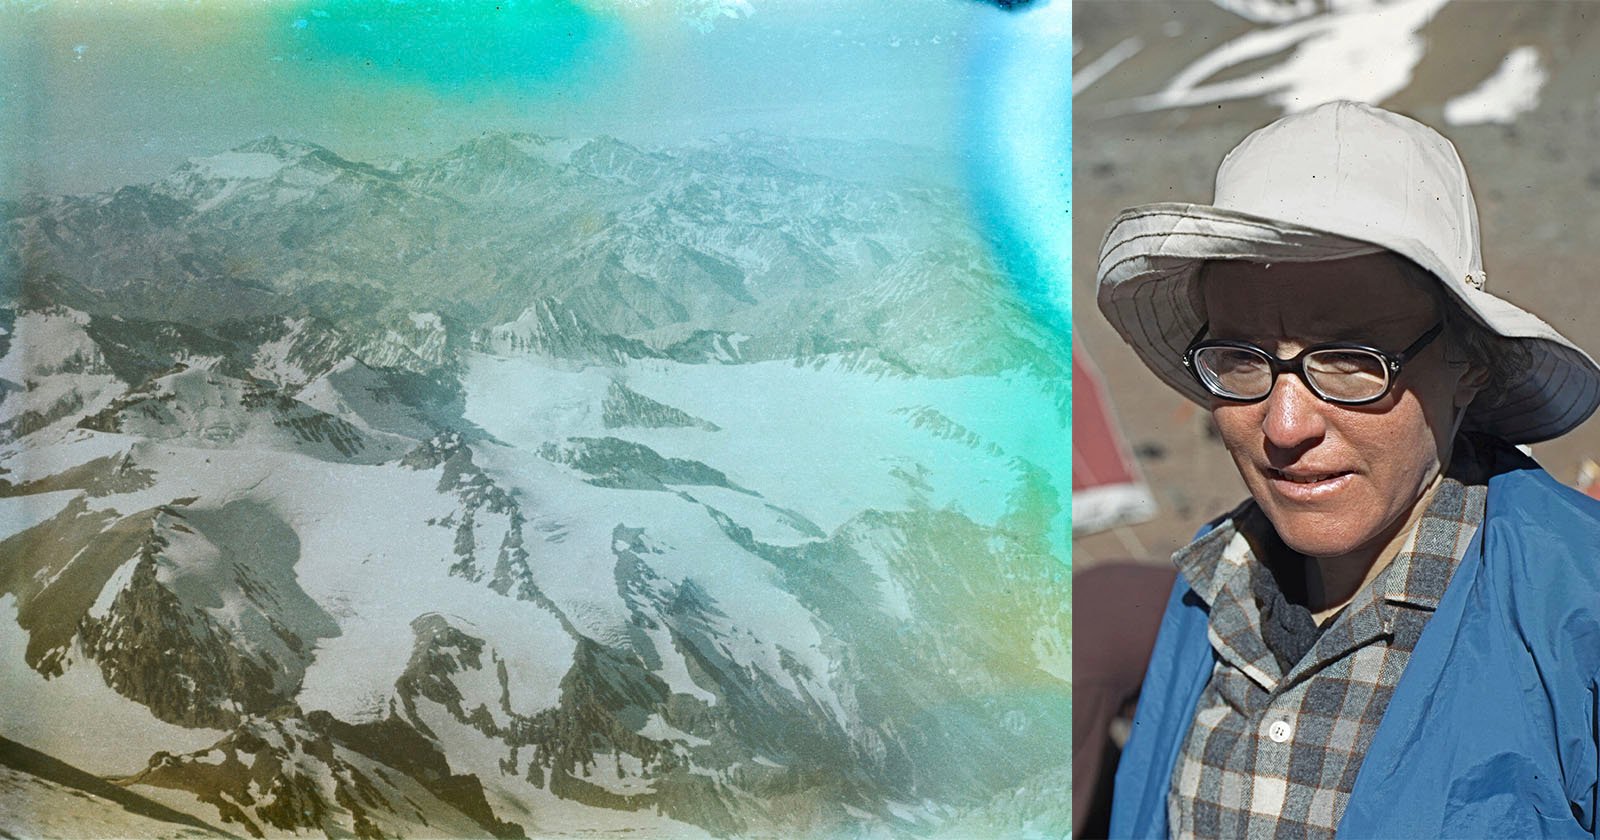 Camera Owned by Mountaineer Who Died in Mysterious Circumstances Discovered